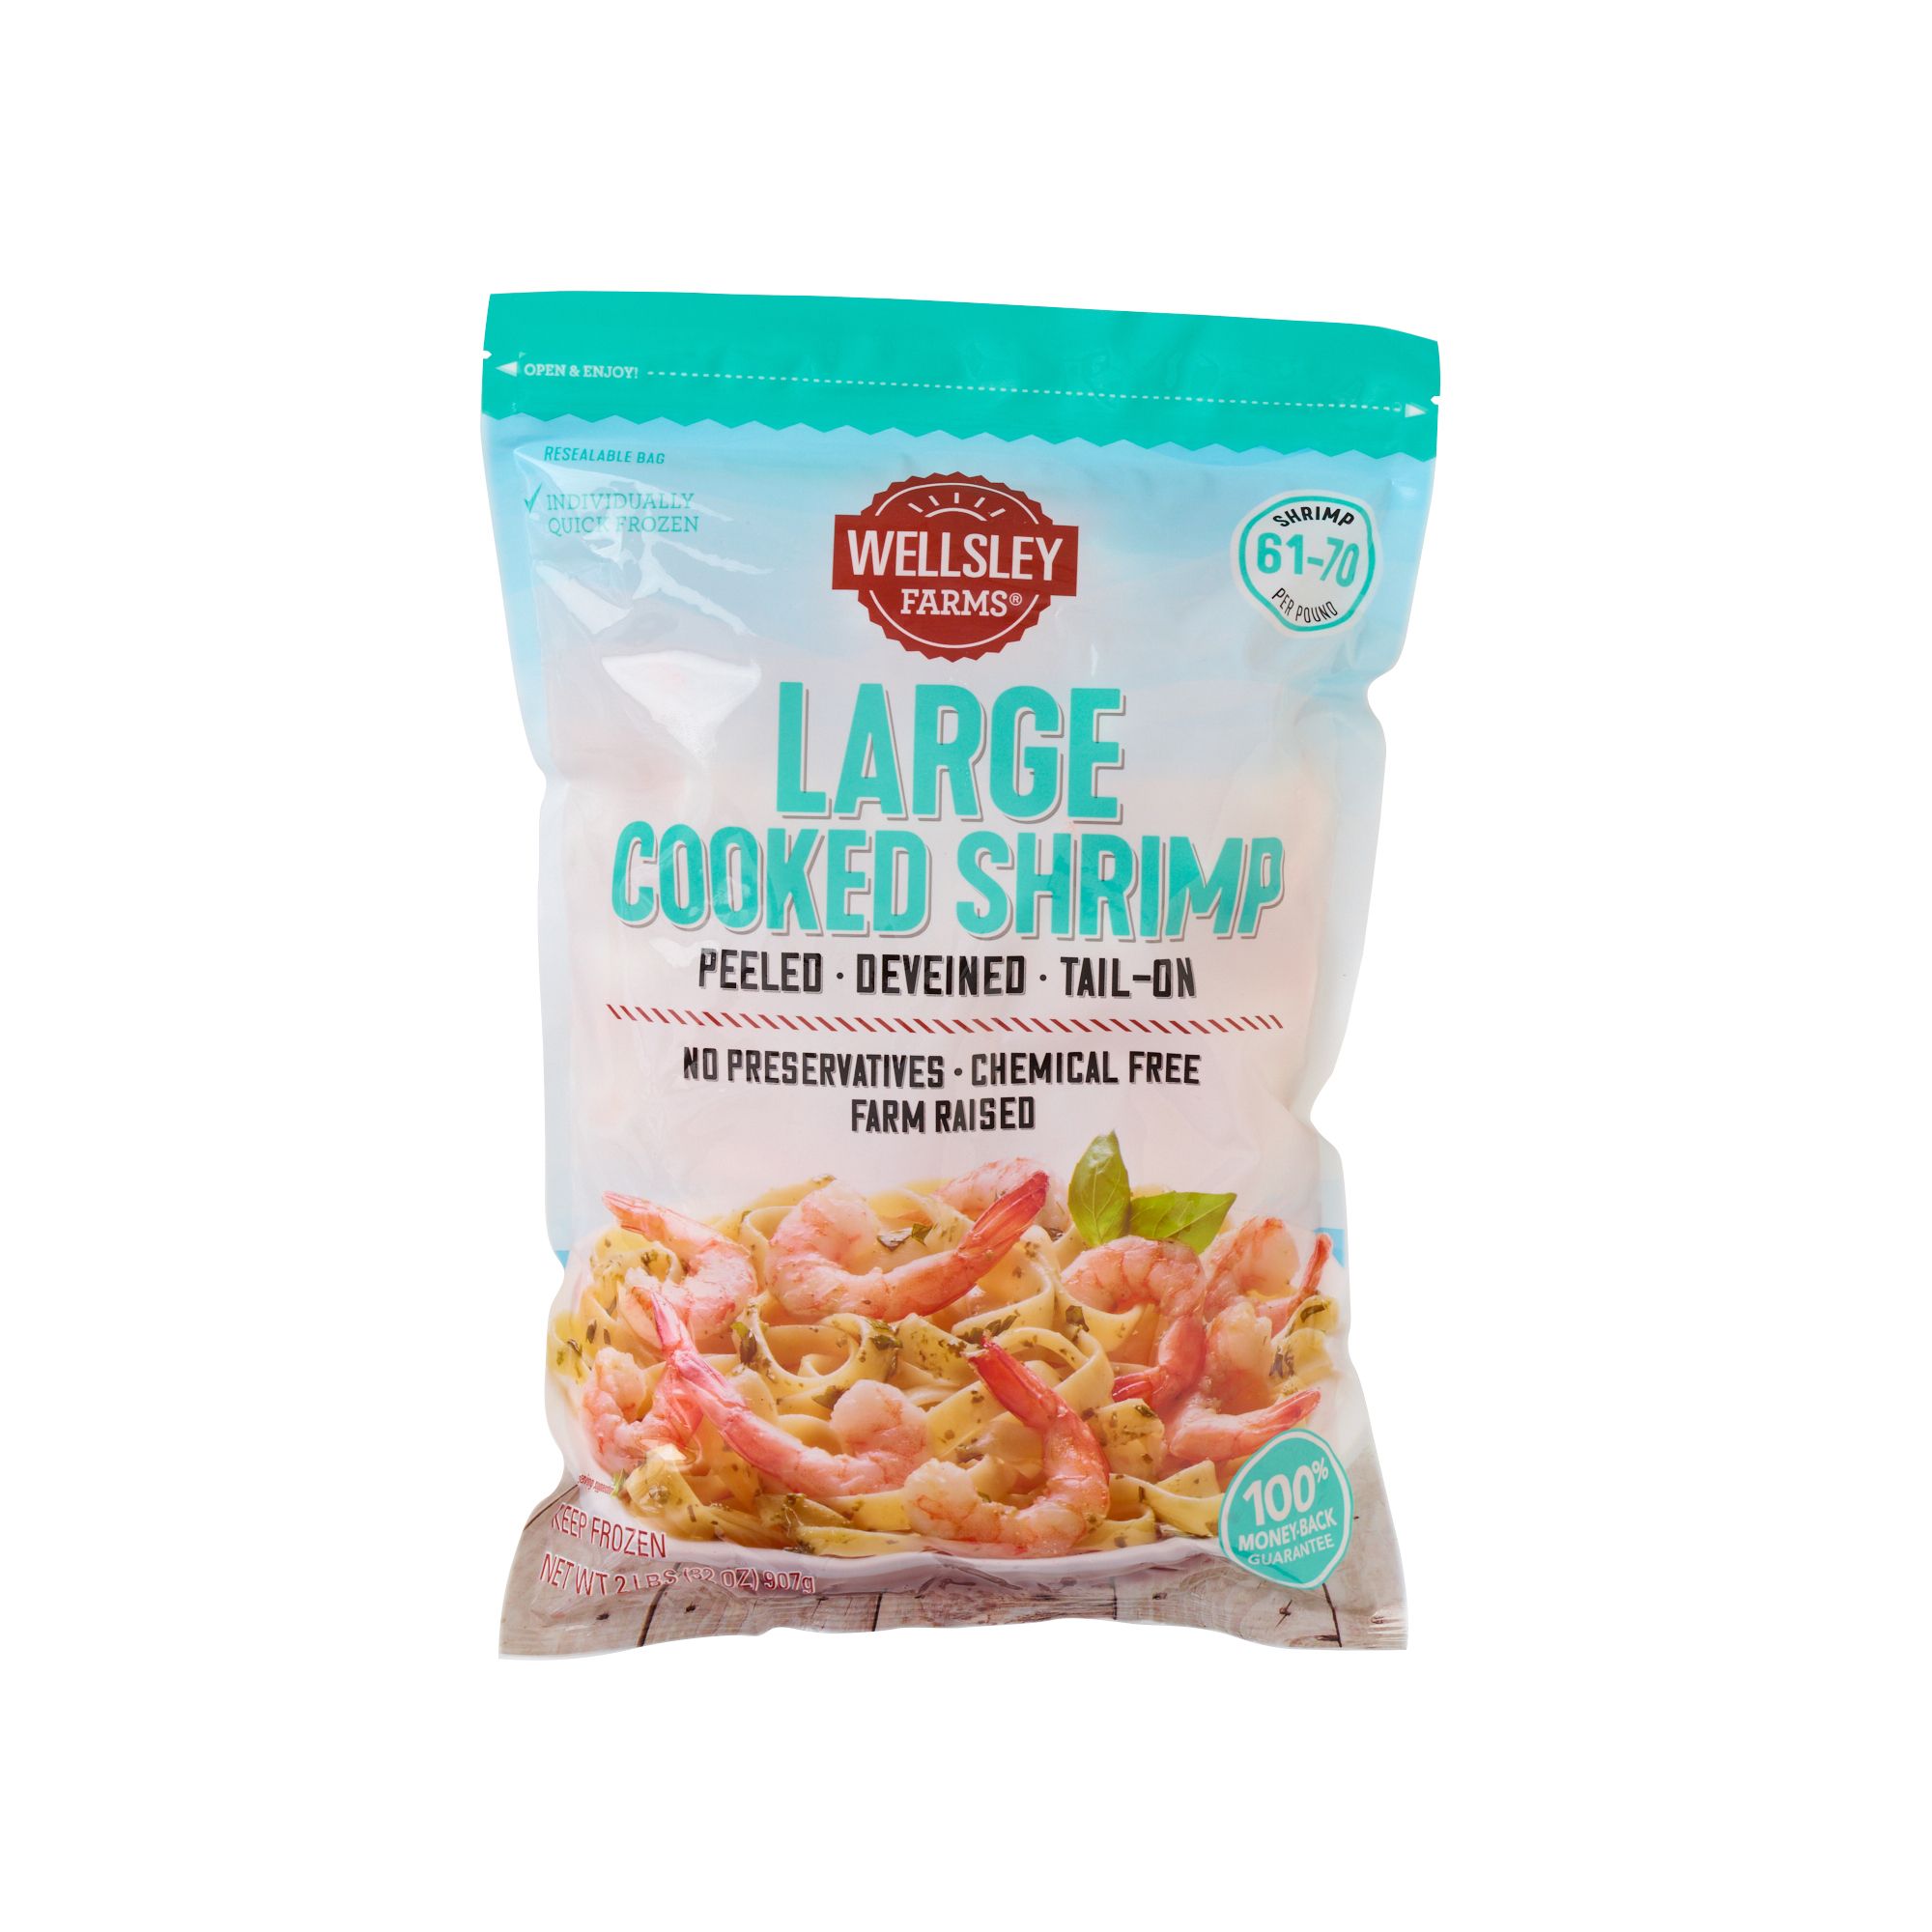 Wellsley Farms Large Cooked Shrimp, 2 lbs.